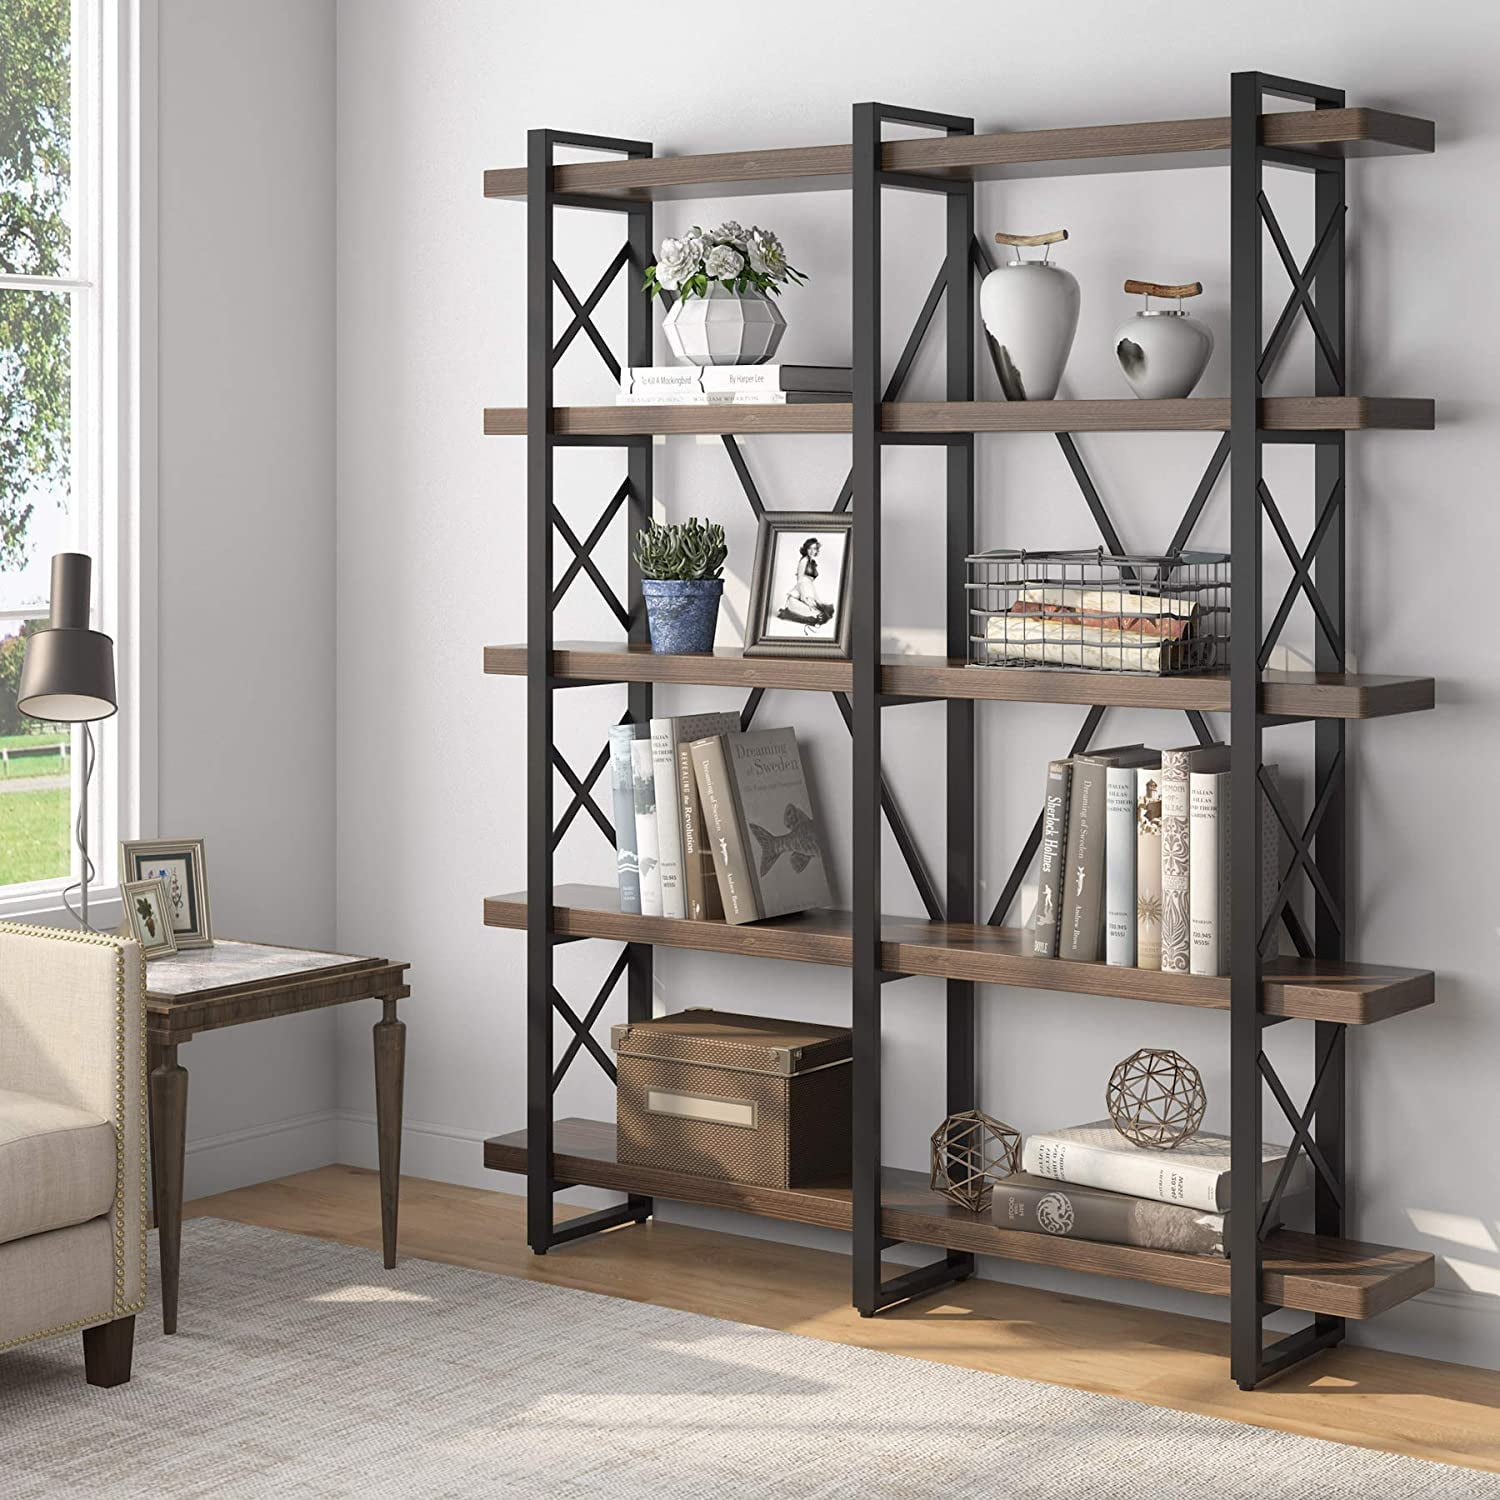 SMAGREHO 5 Tier Industrial Bookshelf,Open Wood Bookcase with Metal Frame Book Shelf for Living Room,Bedroom and Office,Office,Dark Brown